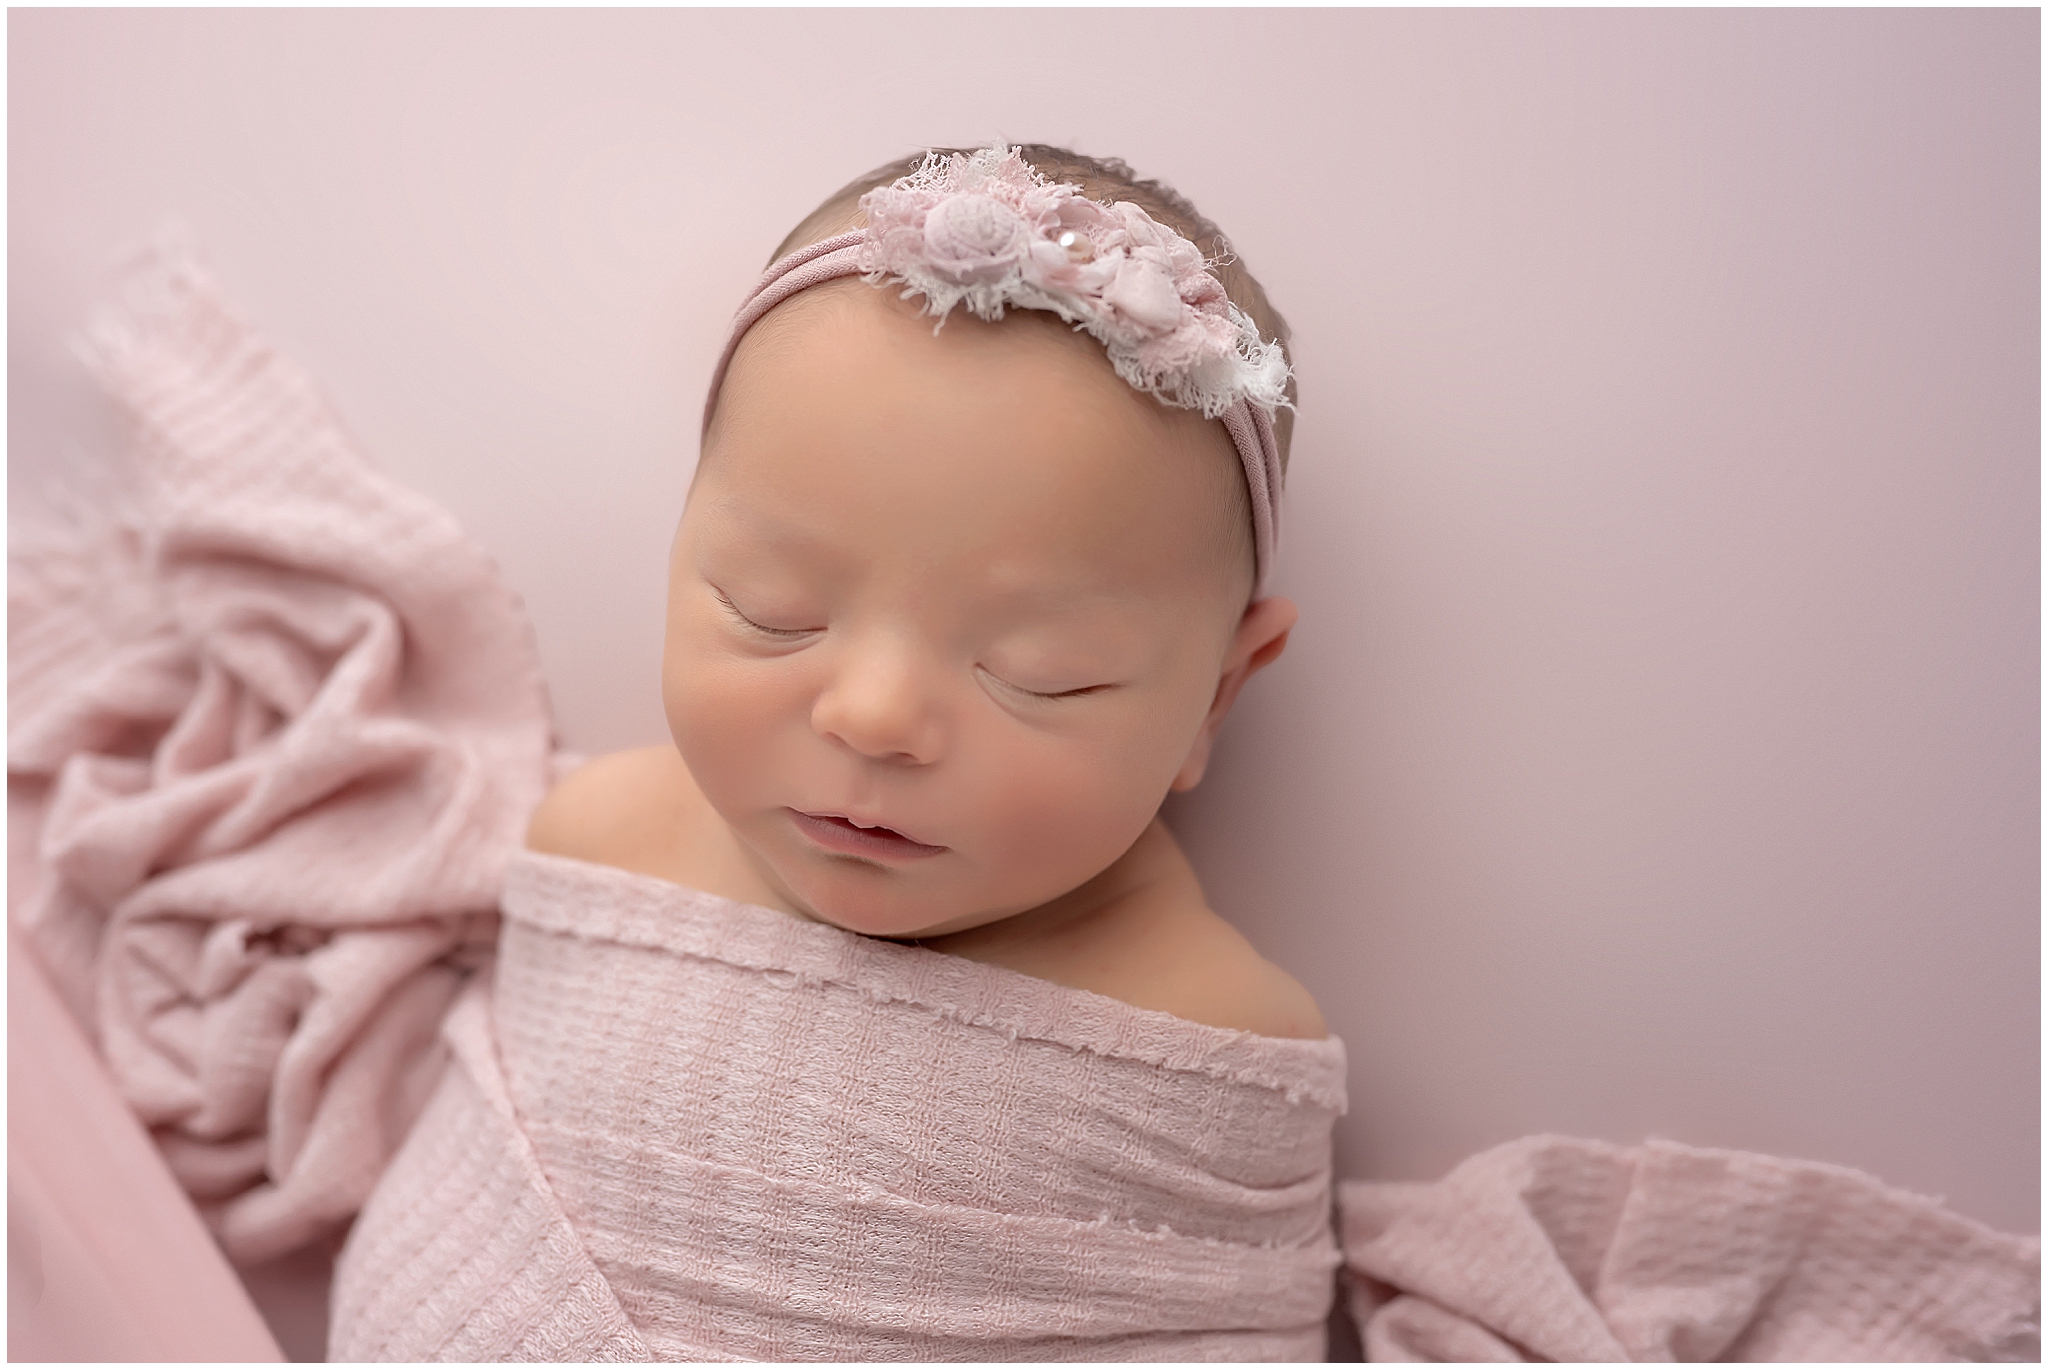 baby sleeping on pink fabric during newborn photography session in london ontario